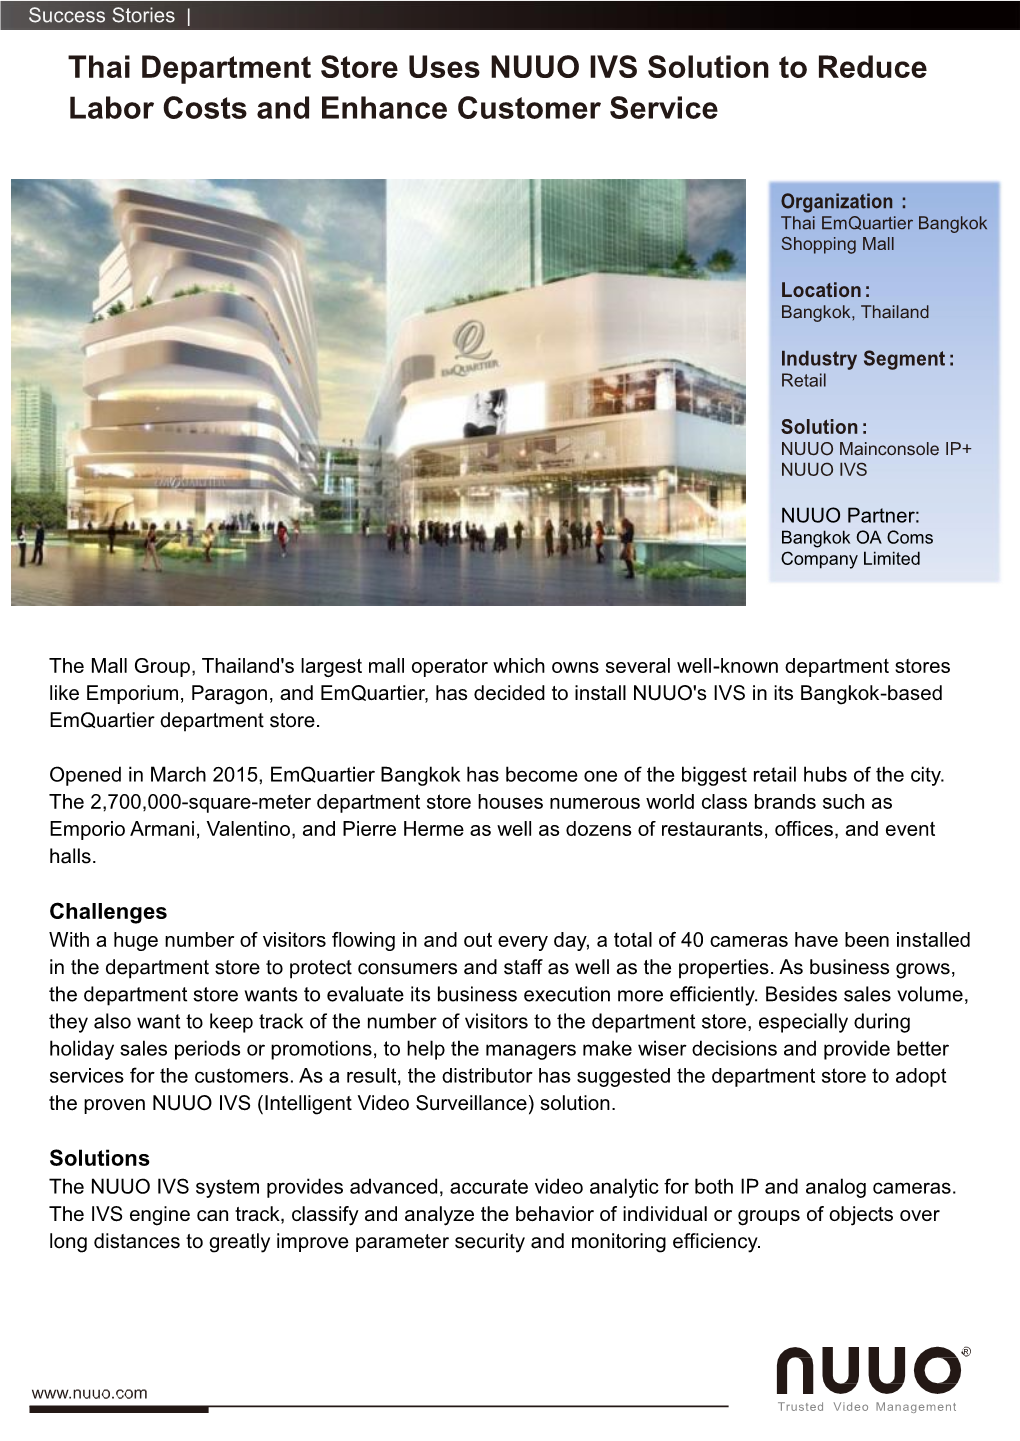 Thai Department Store Uses NUUO IVS Solution to Reduce Labor Costs and Enhance Customer Service